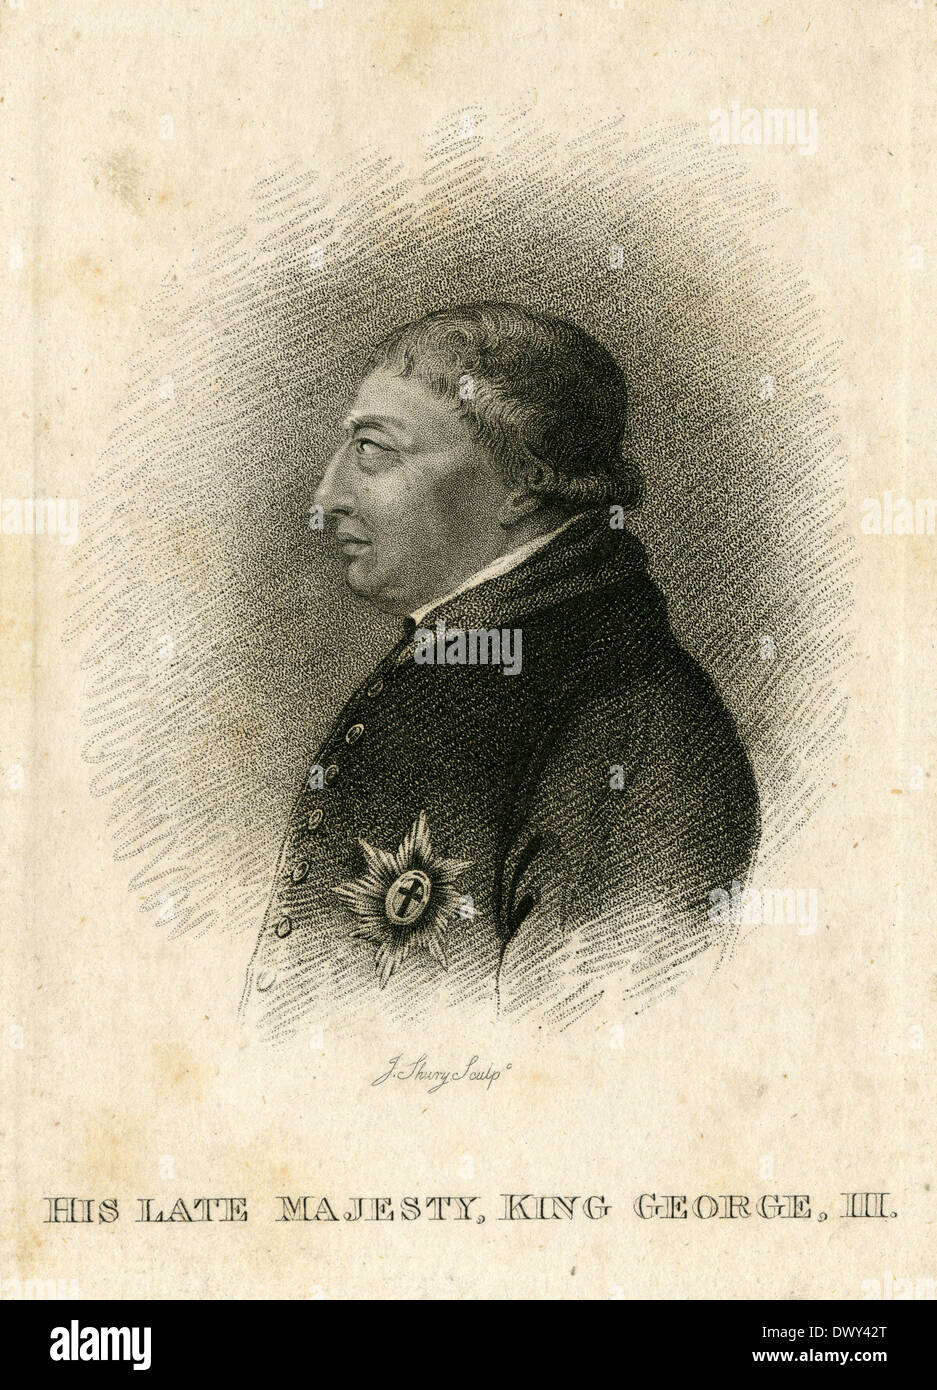 Circa 1820 antique engraving, His Late Majesty, King George III of the United Kingdom. Stock Photo